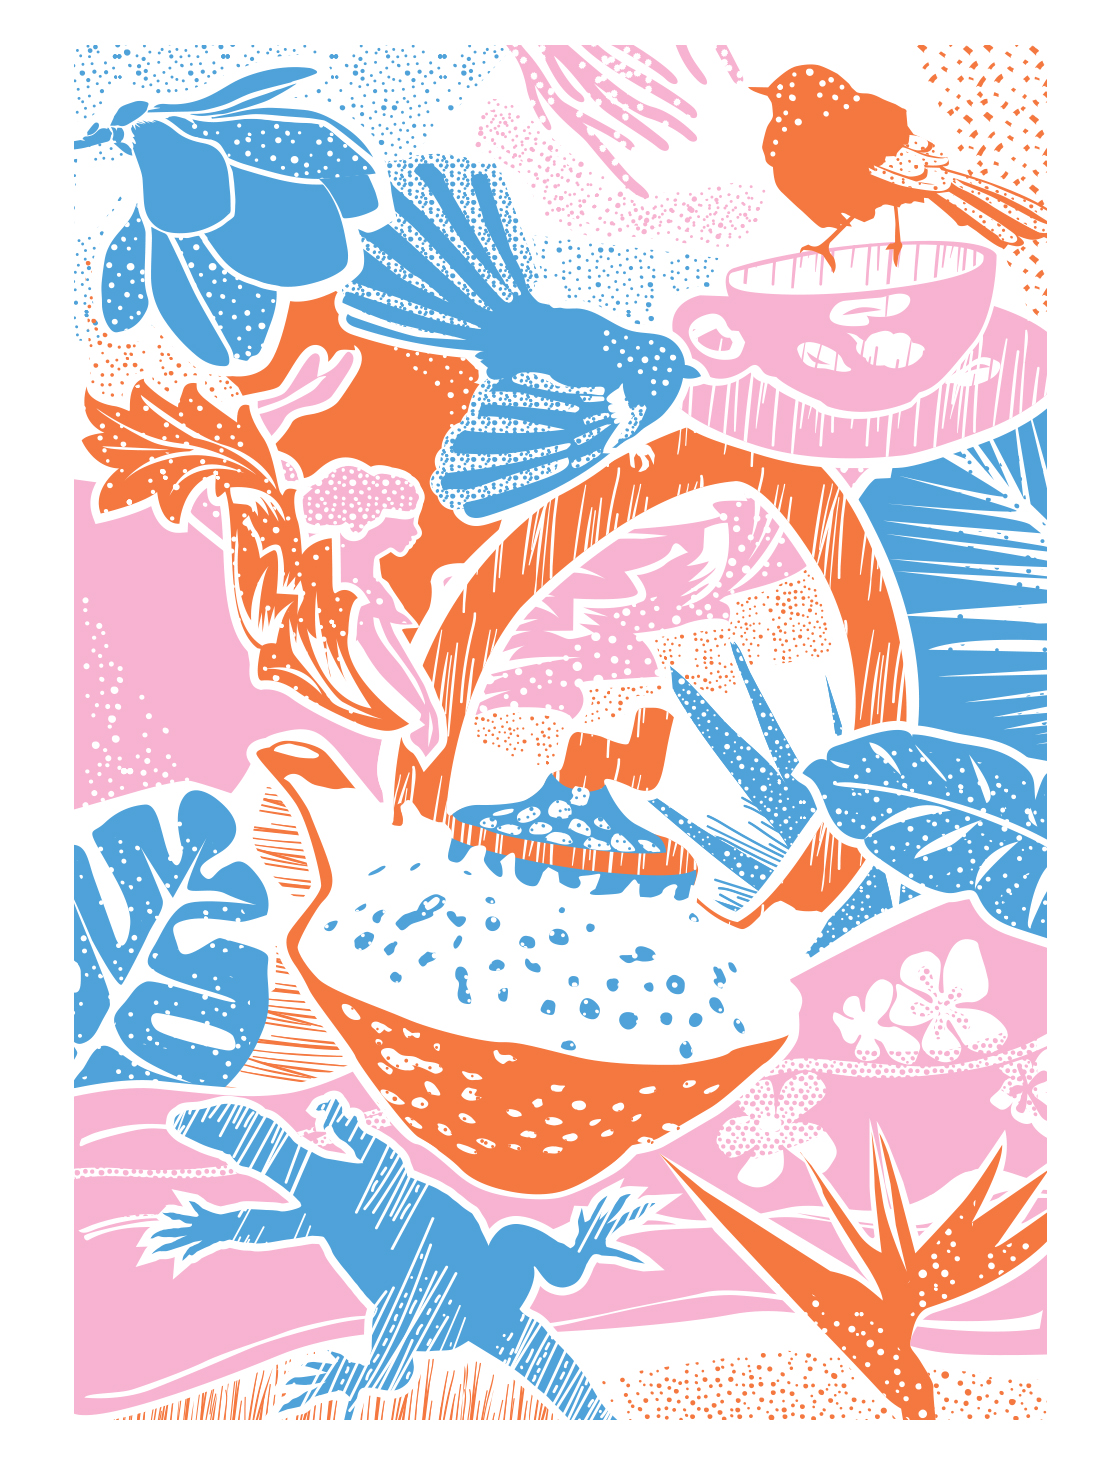  ‘Tea party’ screen printed on tea towels and cards. 